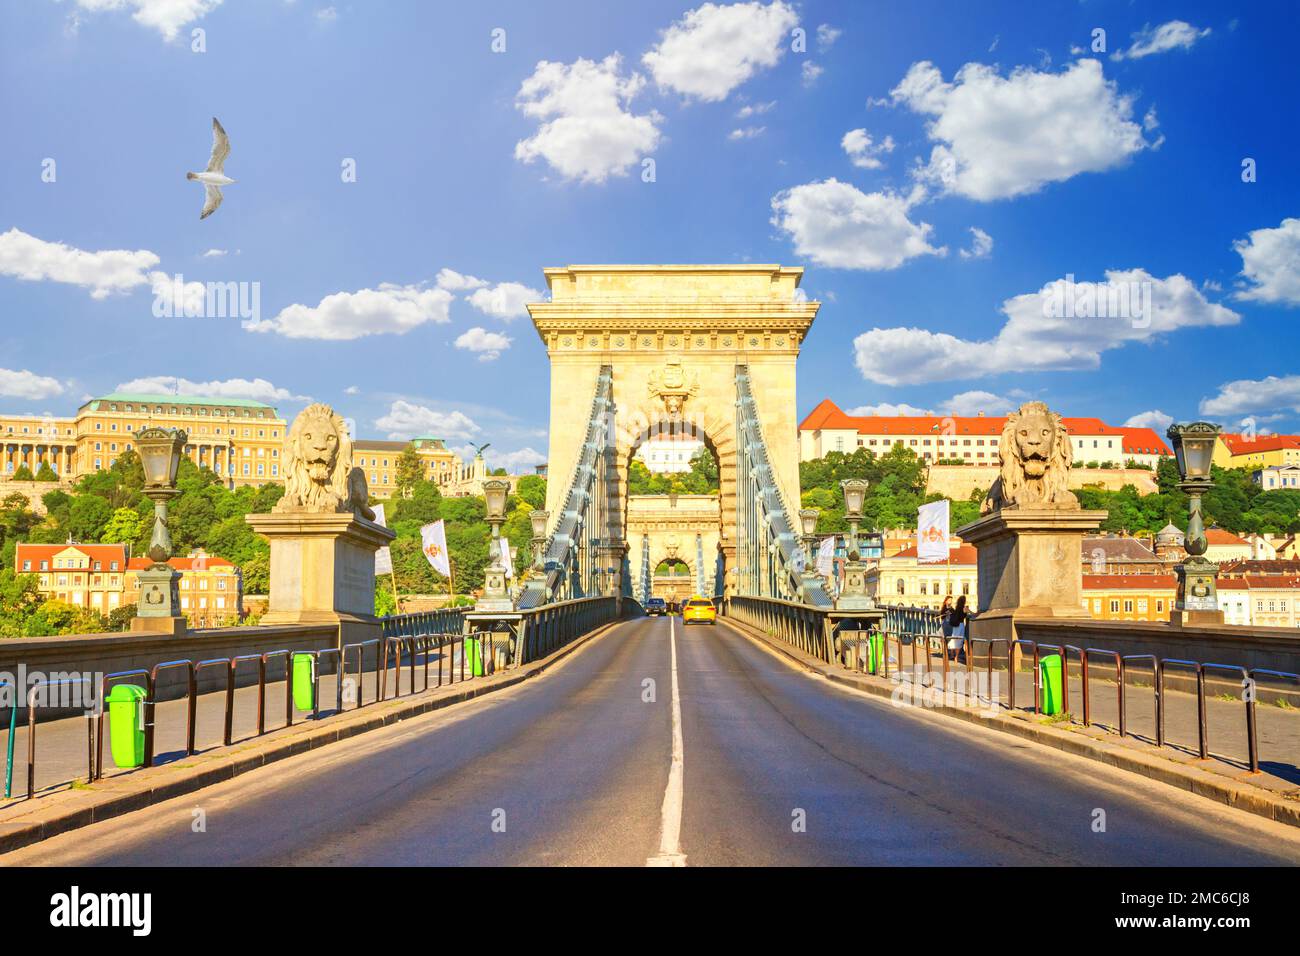 City landscape - morning view of the Szechenyi Chain Bridge and Buda part of Budapest on the west bank of the Danube, Hungary Stock Photo